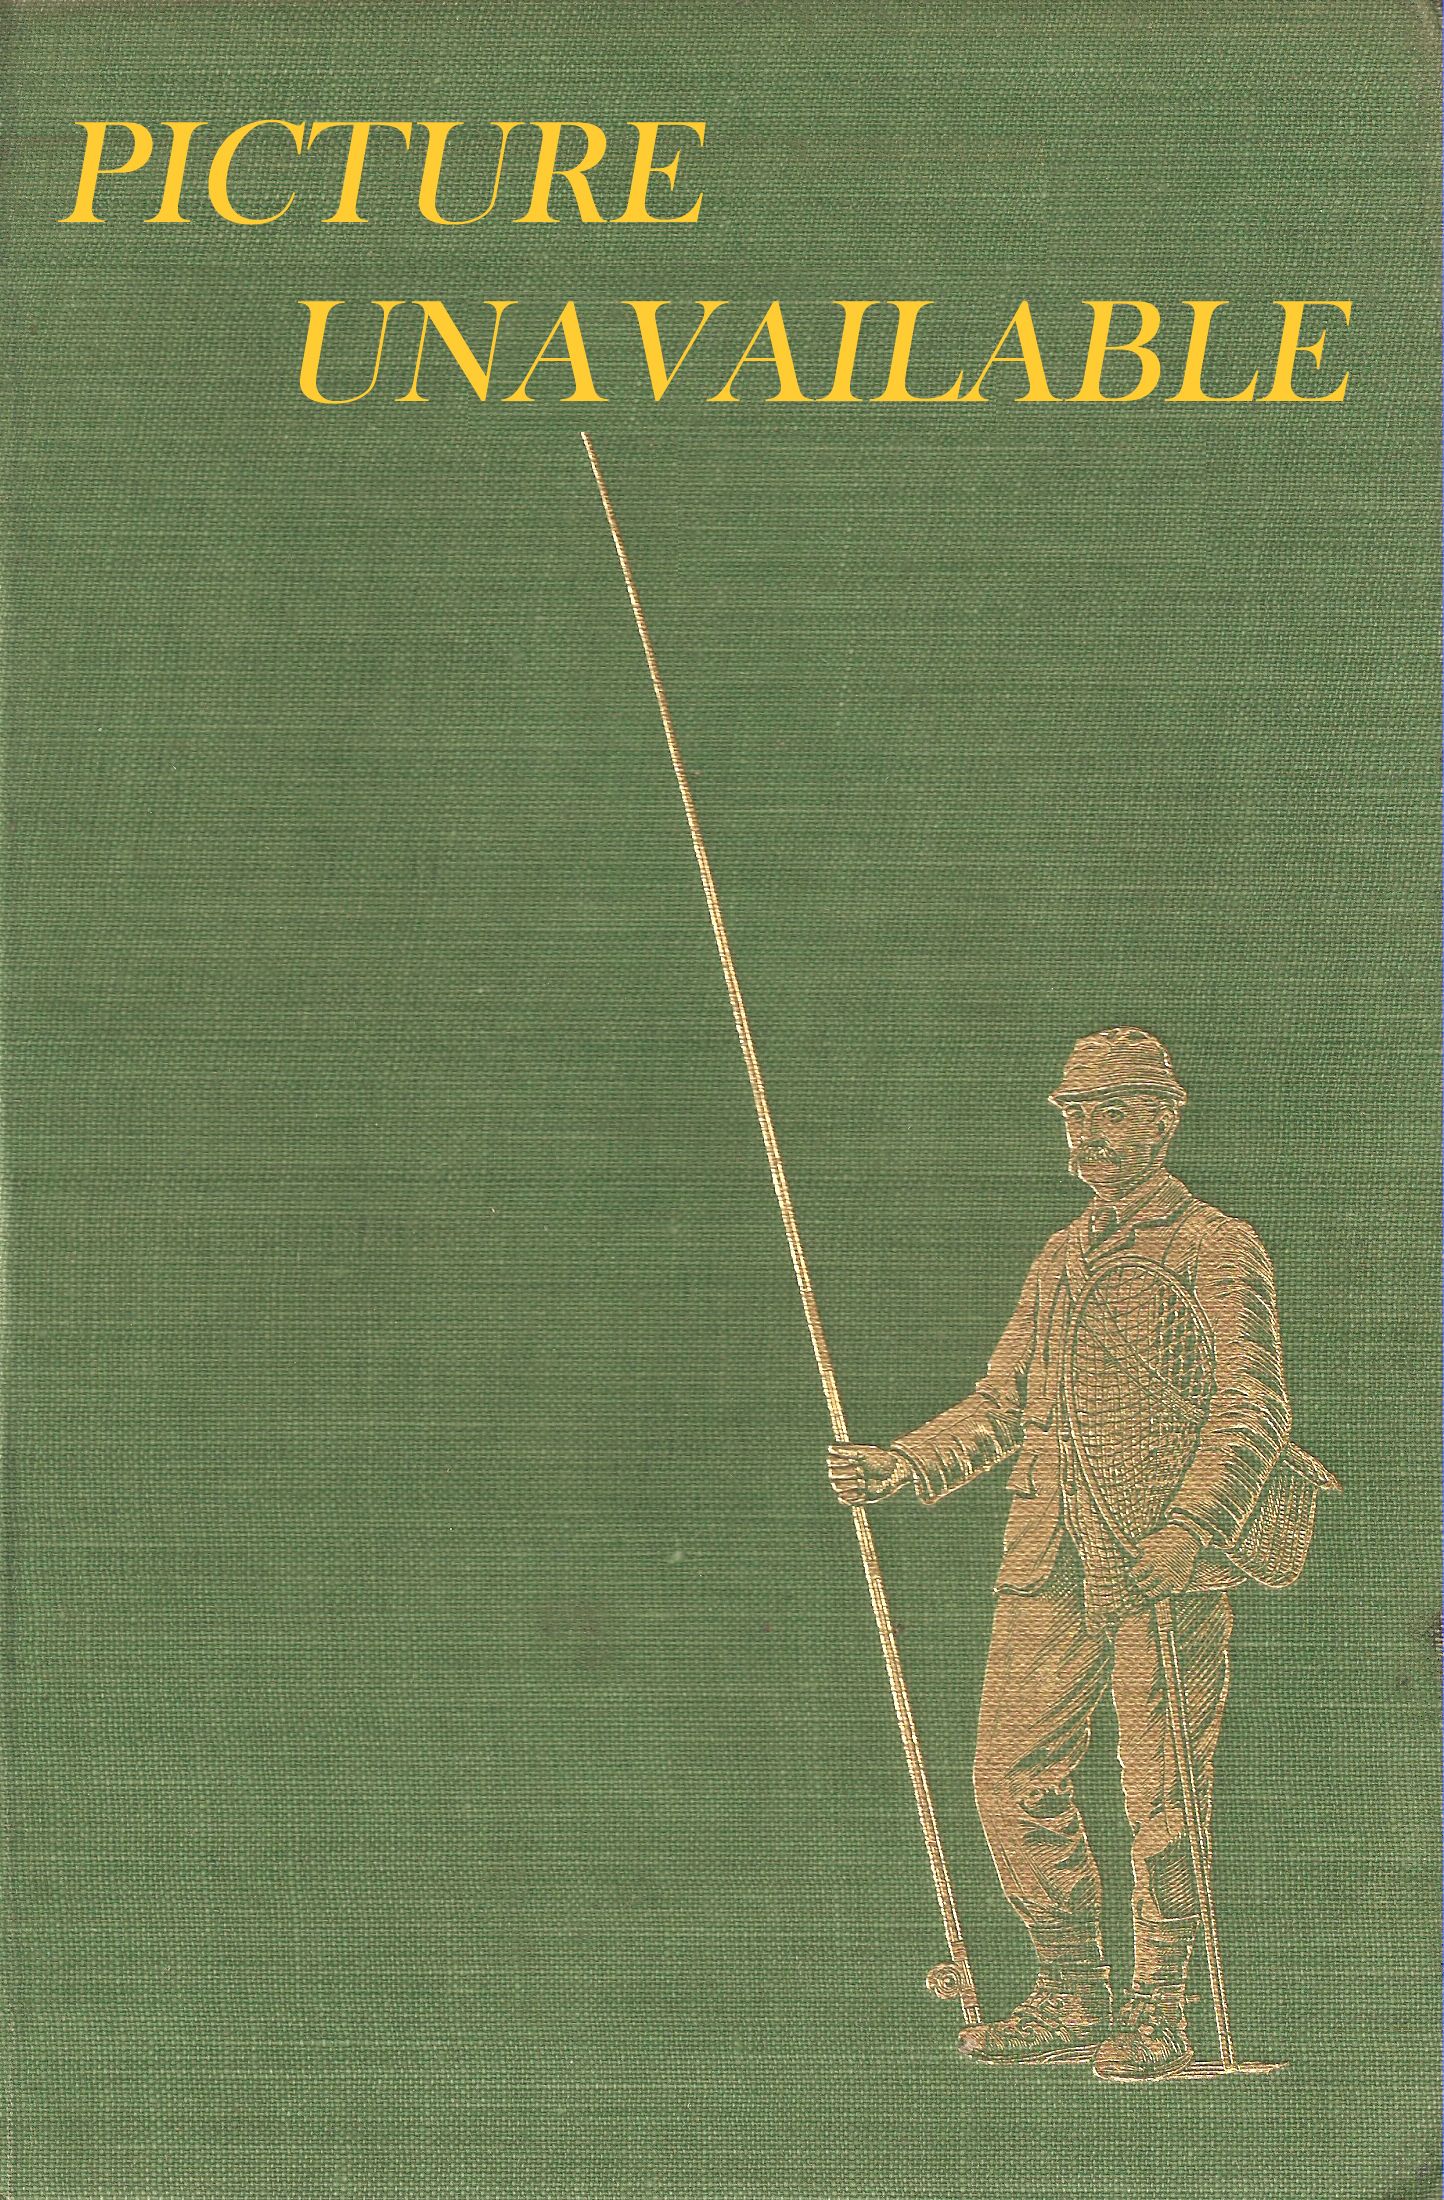 CATALOGUE OF THE COLLECTION OF ANGLING PICTURES, EARLY ENGLISH DRAWINGS  AND MEZZOTINTS OF ARTHUR N. GILBEY, ESQ... Which will be sold at auction  by Messrs. Christie, Manson and Woods, Ltd., ... on Thursday, April 25th and  Friday, April 26th, 1940.